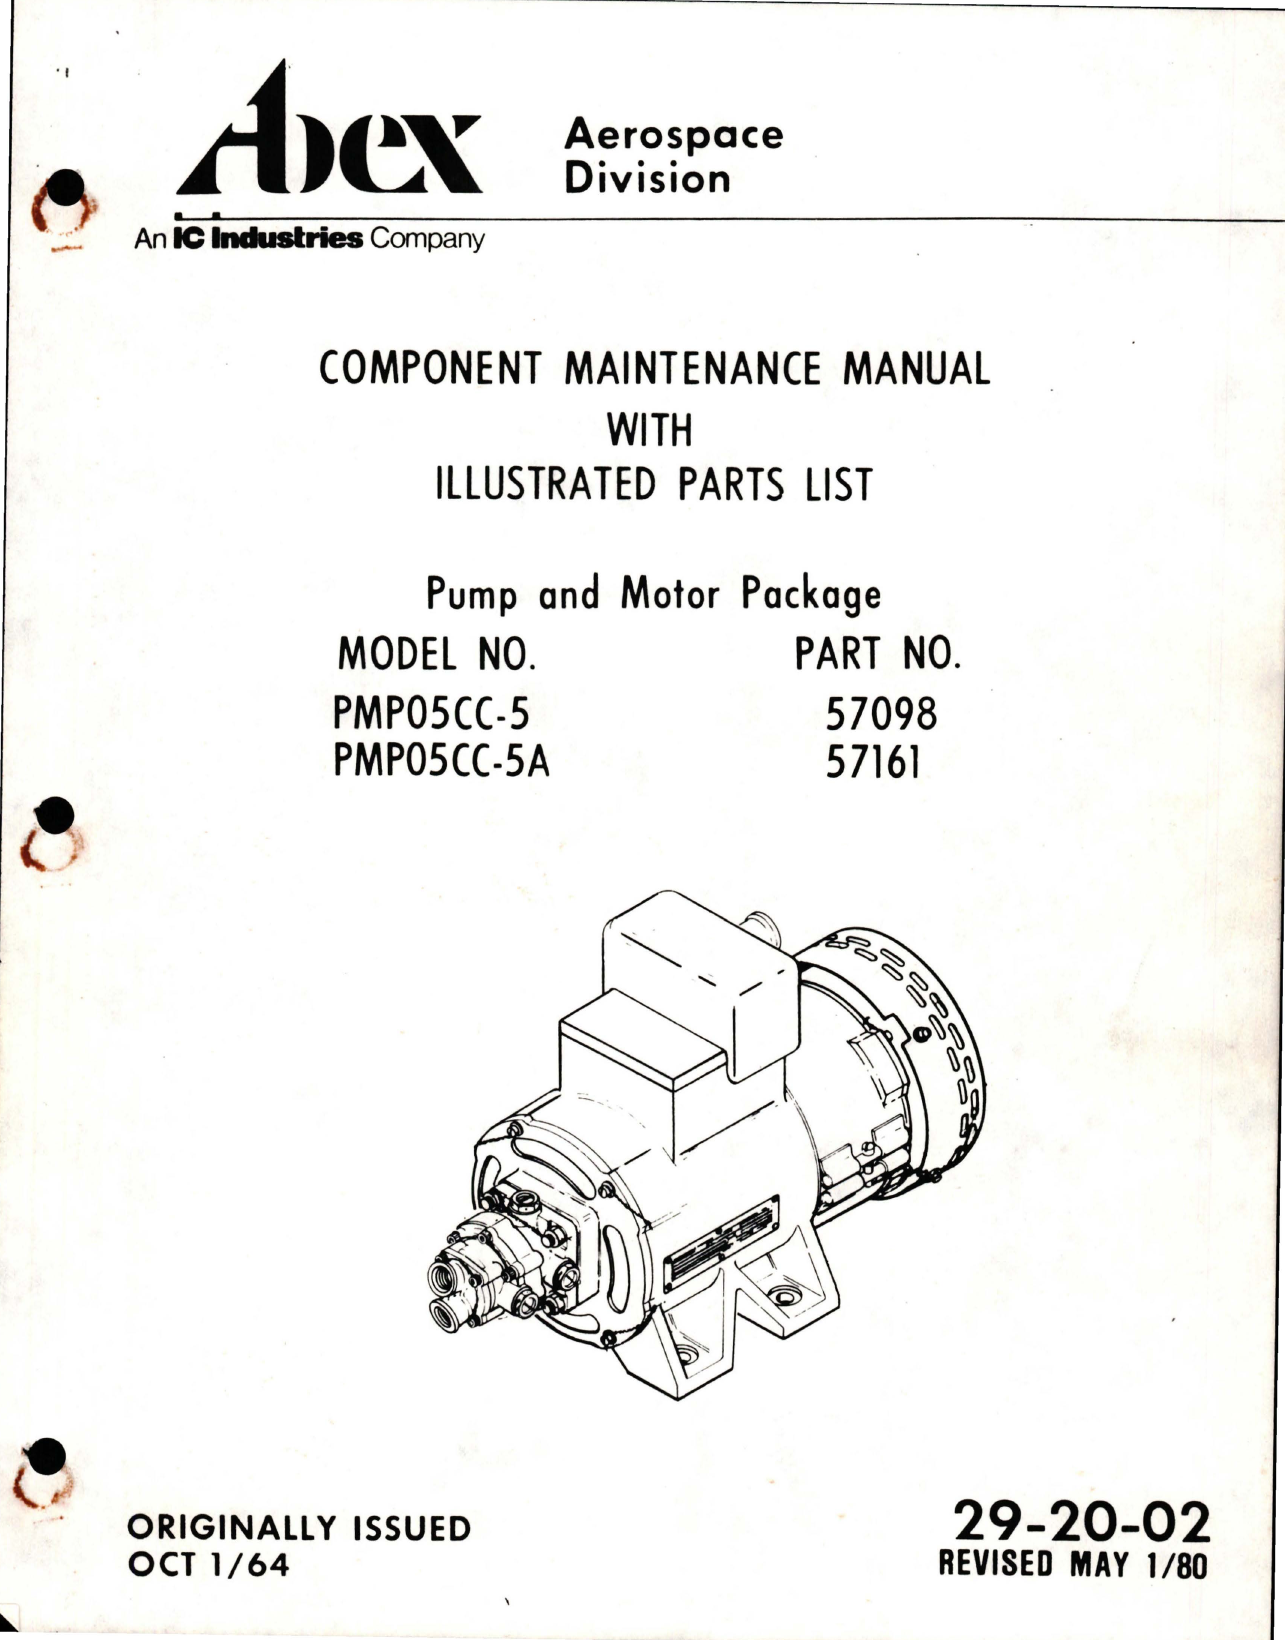 Sample page 1 from AirCorps Library document: Maintenance Manual with Illustrated Parts List for Pump and Motor Package - Parts 57098, 57161 